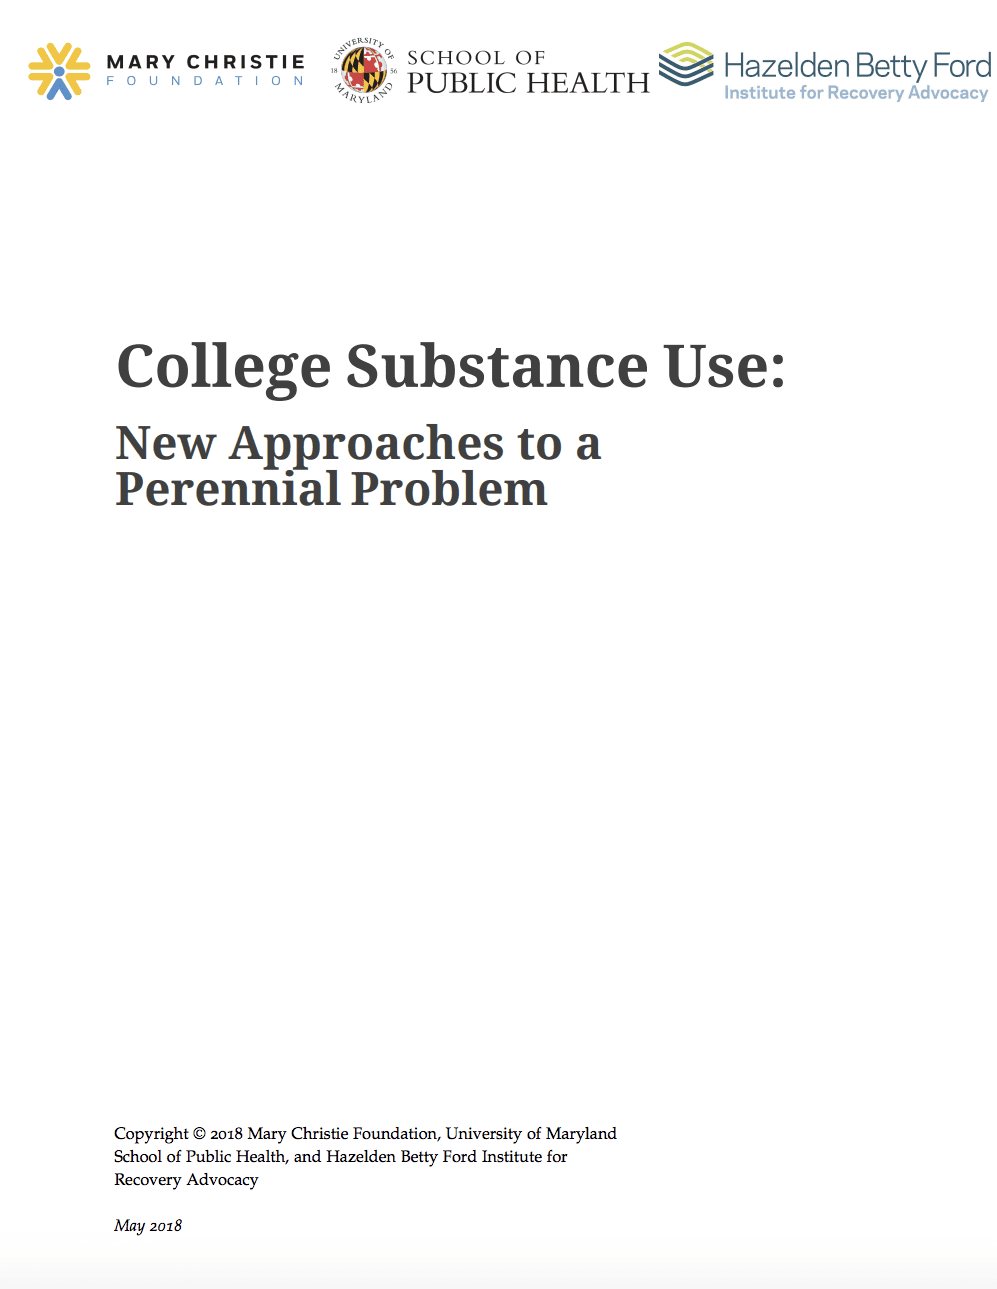 College Substance Use: New Approaches to a Perennial Problem